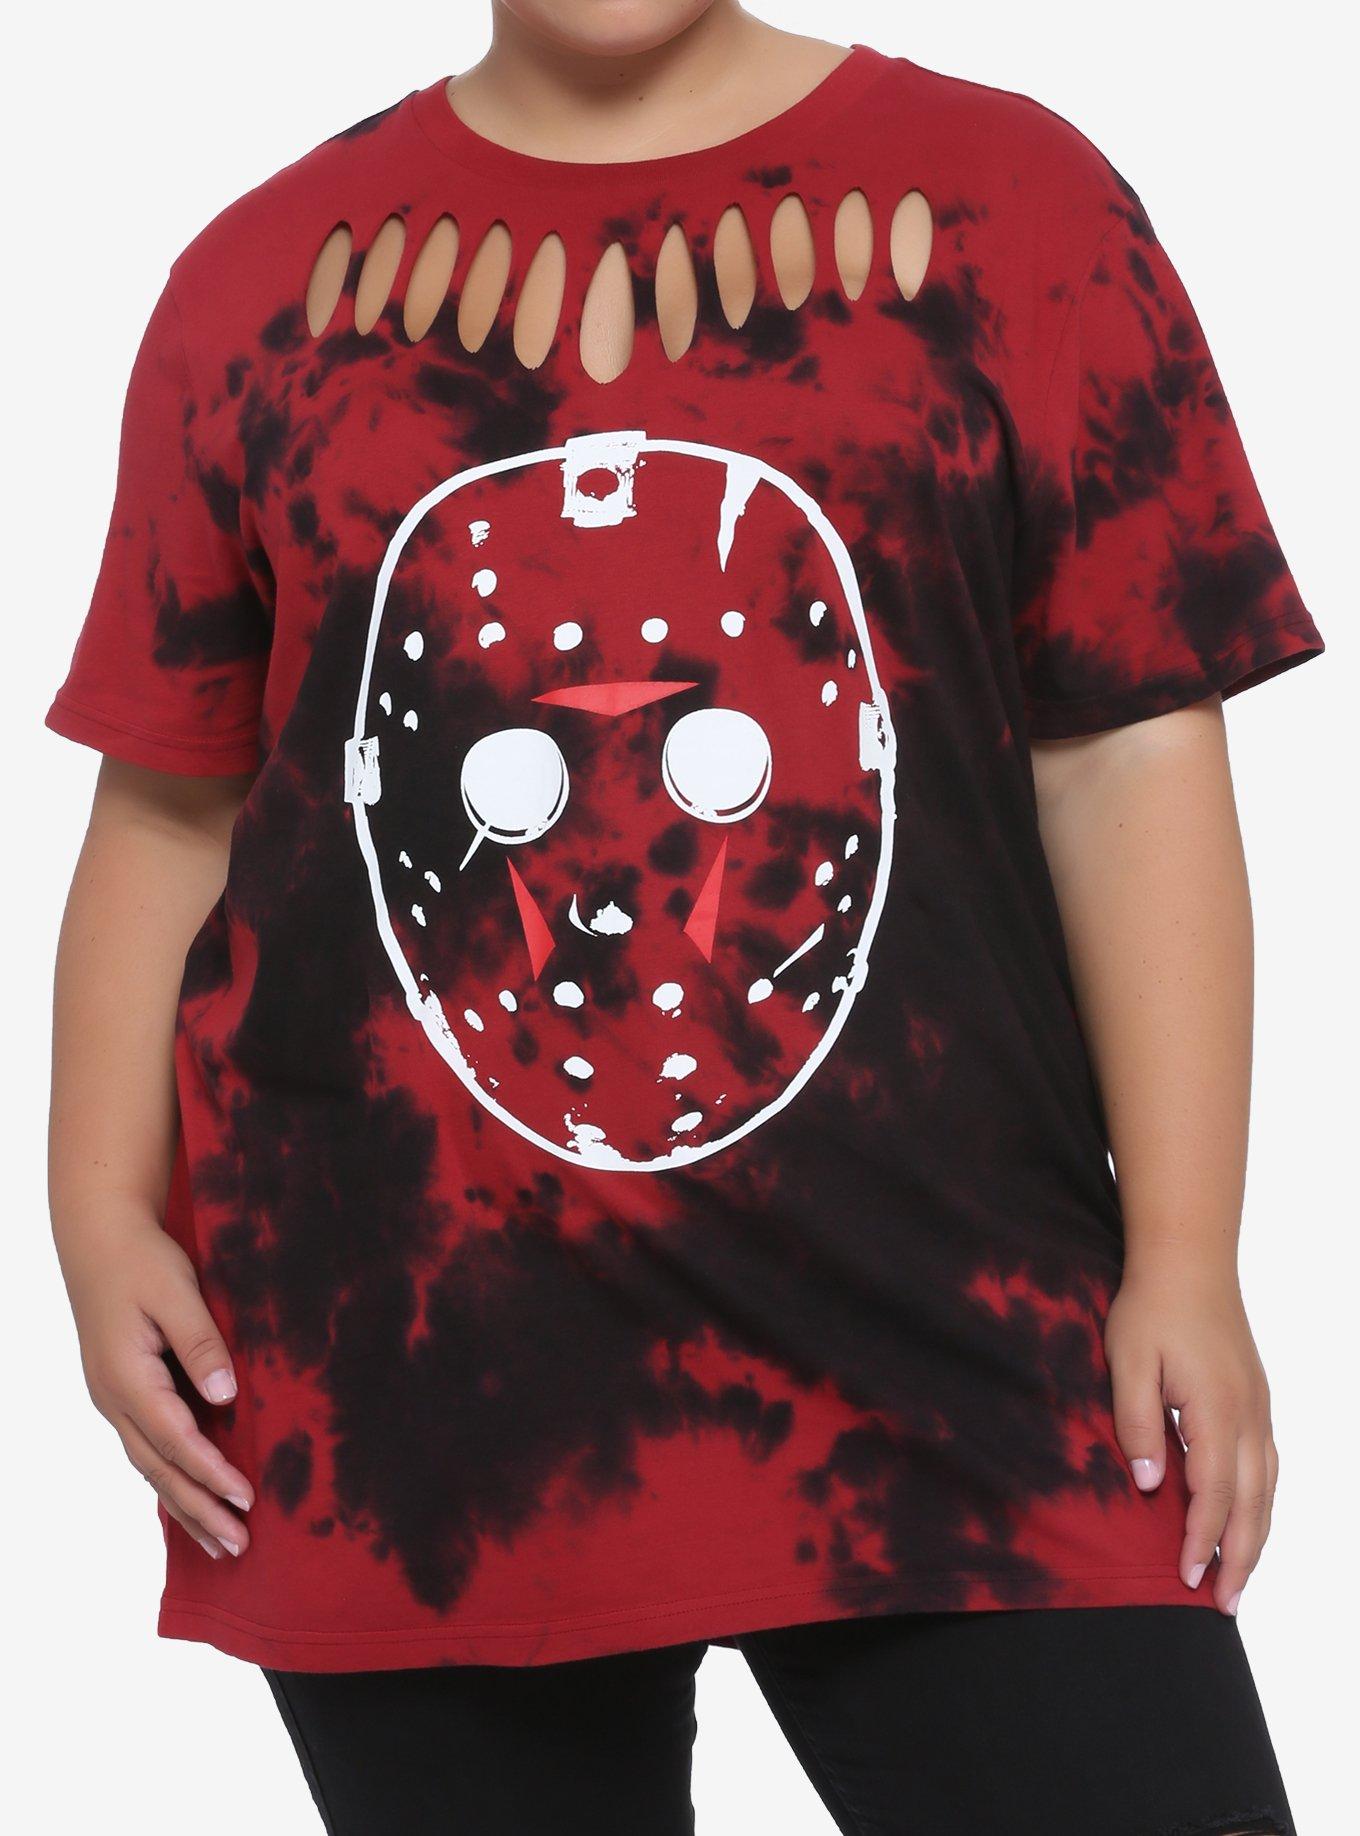 Friday The 13th Mask Slashed Tie-Dye Girls T-Shirt Plus Size, RED, hi-res